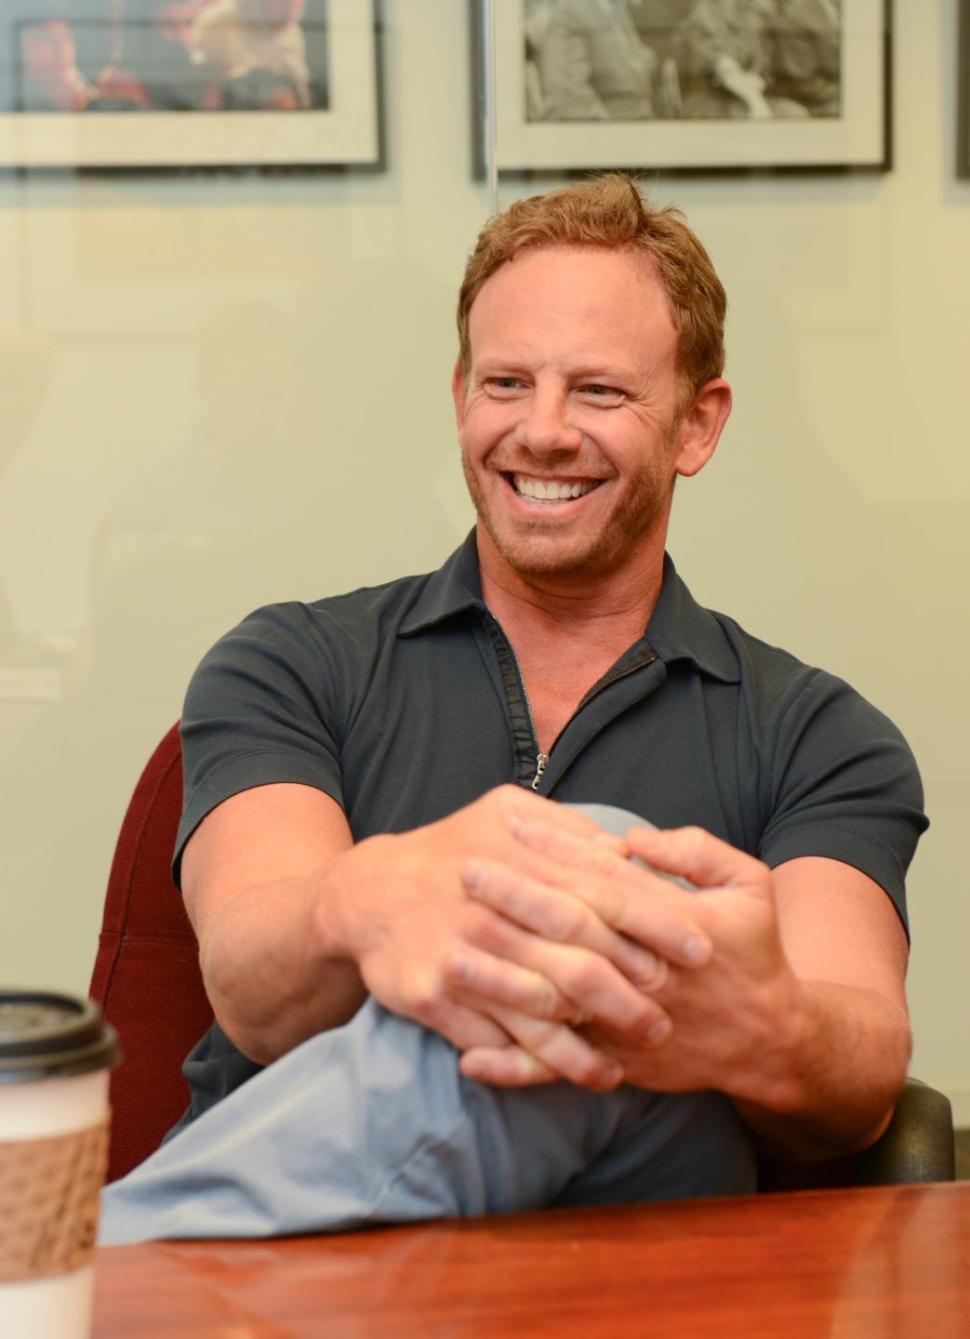 "Sharknado" star Ian Ziering on a visit to the Daily News